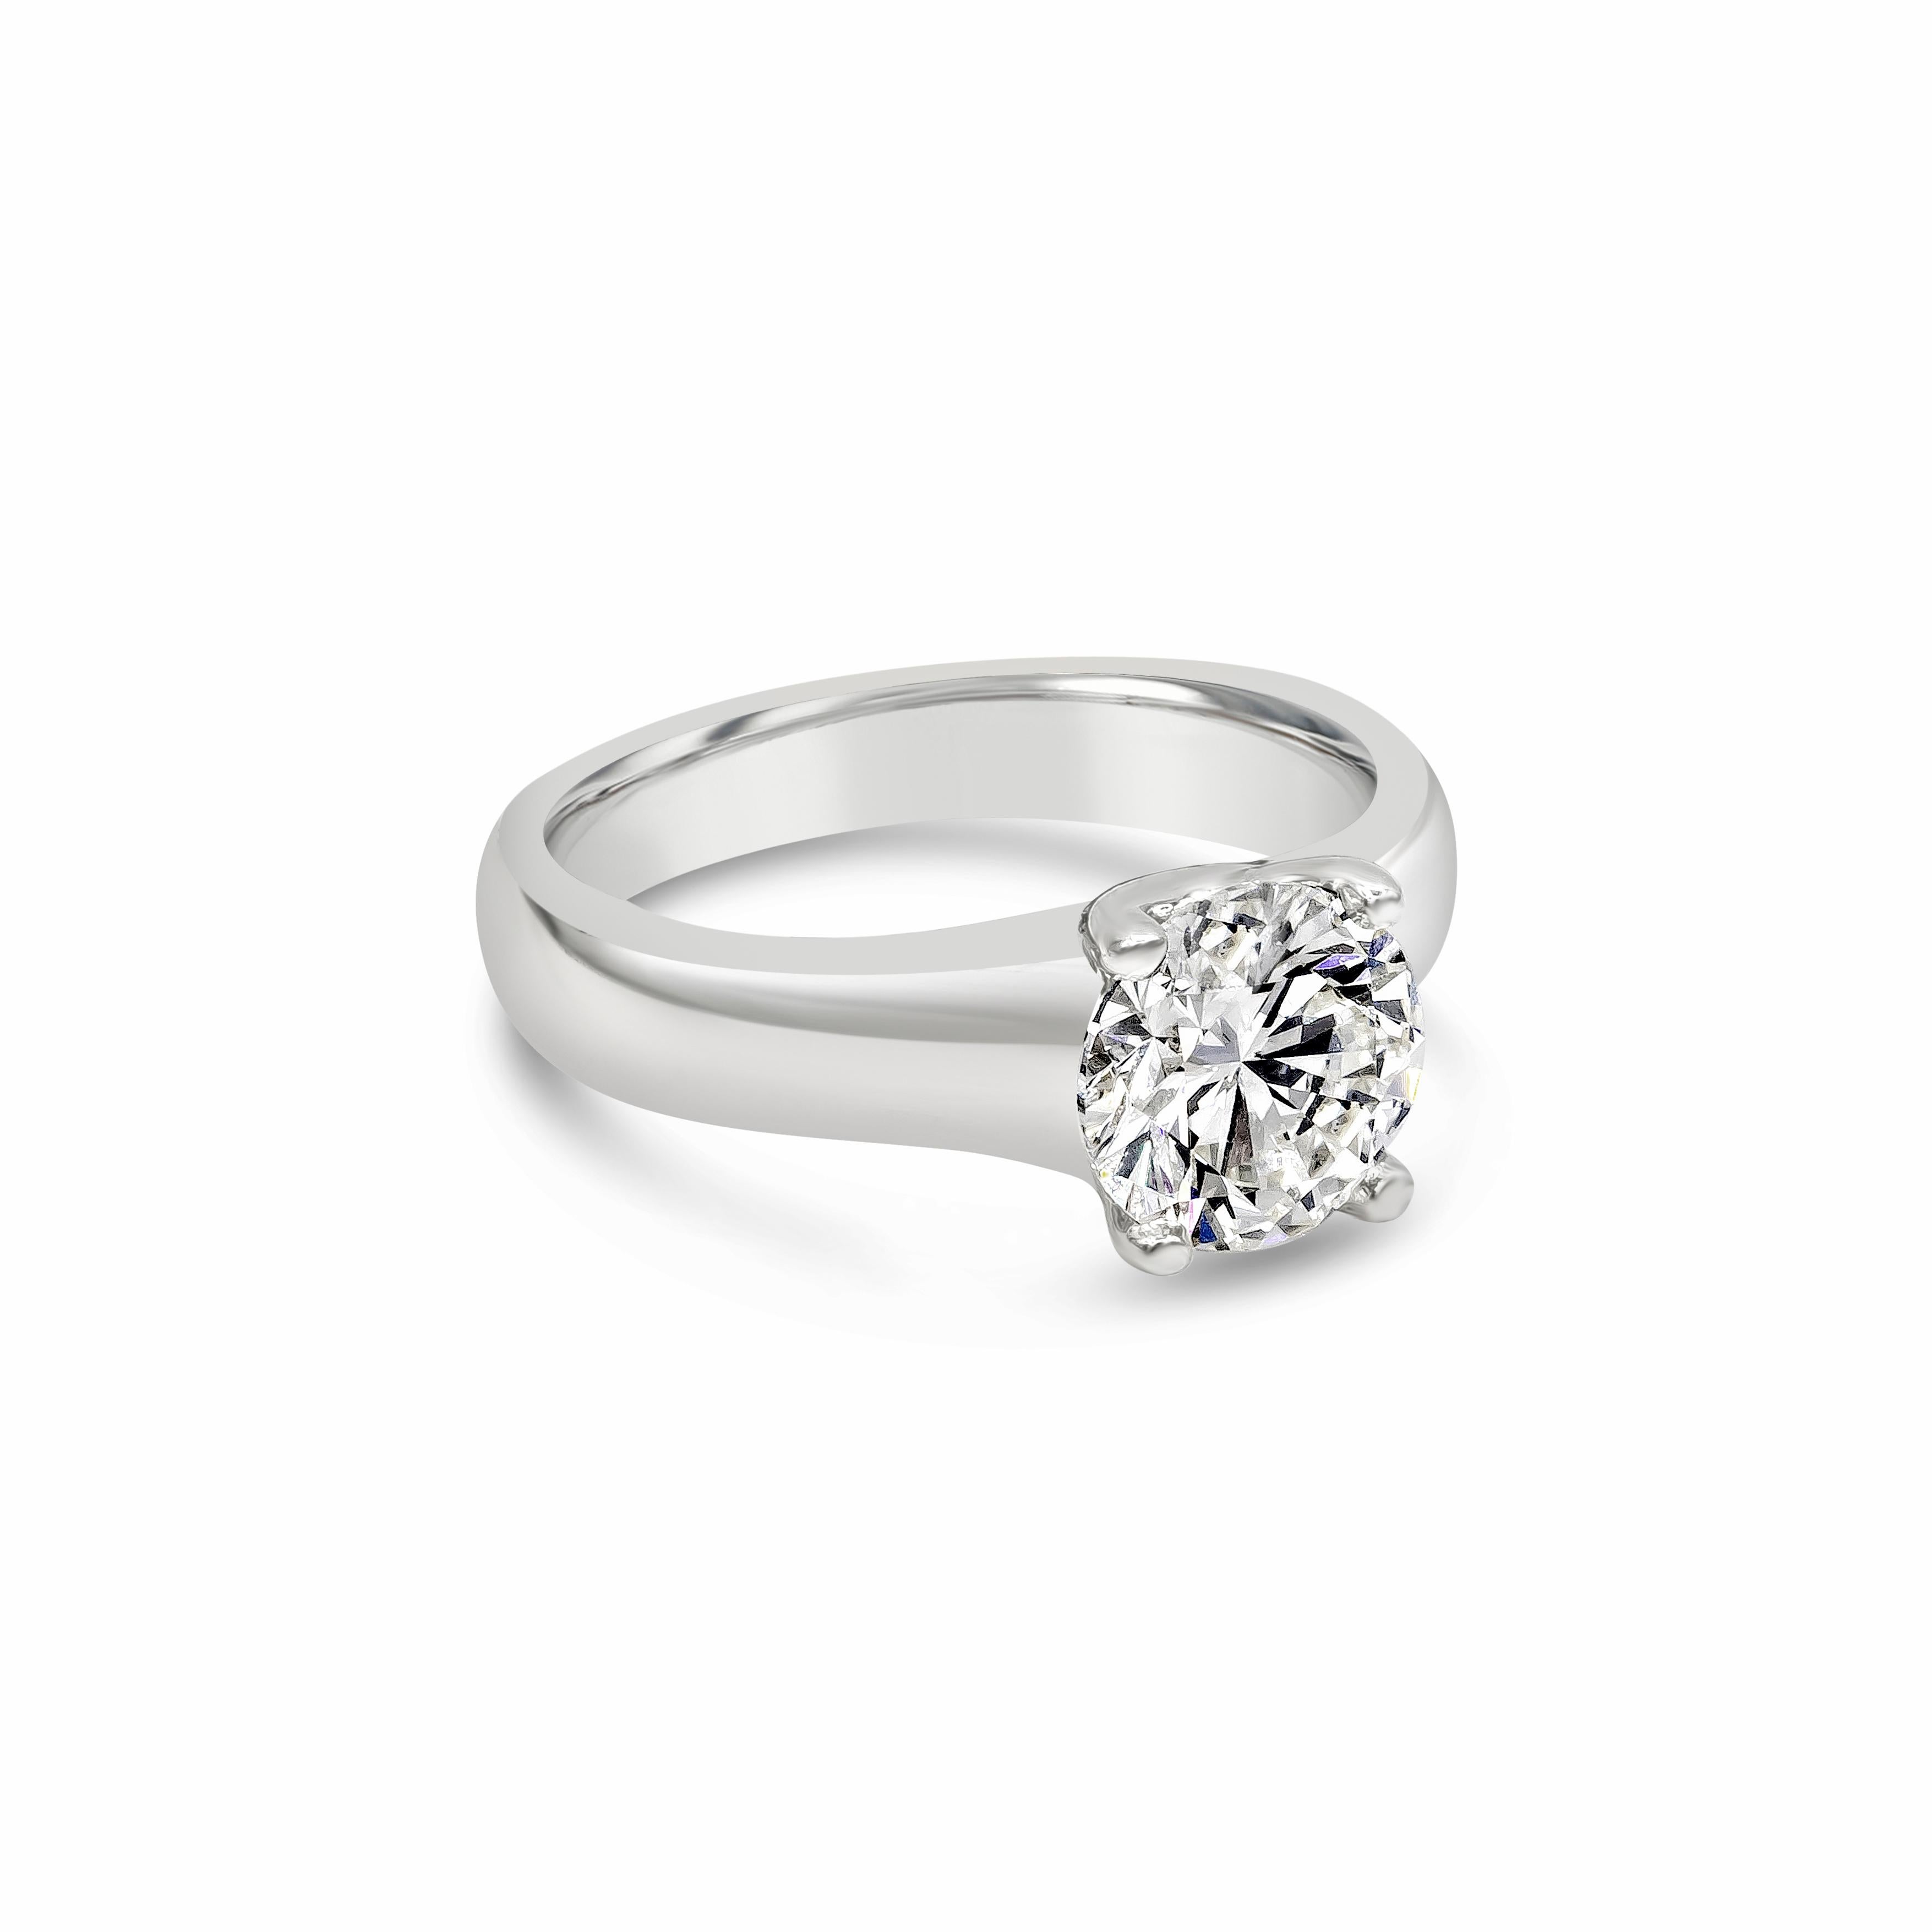 A timeless solitaire engagement ring style showcasing a 1.53 carat brilliant round diamond, Made with 18K White Gold. Size 5.25 US

Style available in different price ranges. Prices are based on diamond size, and specification. Please contact us for